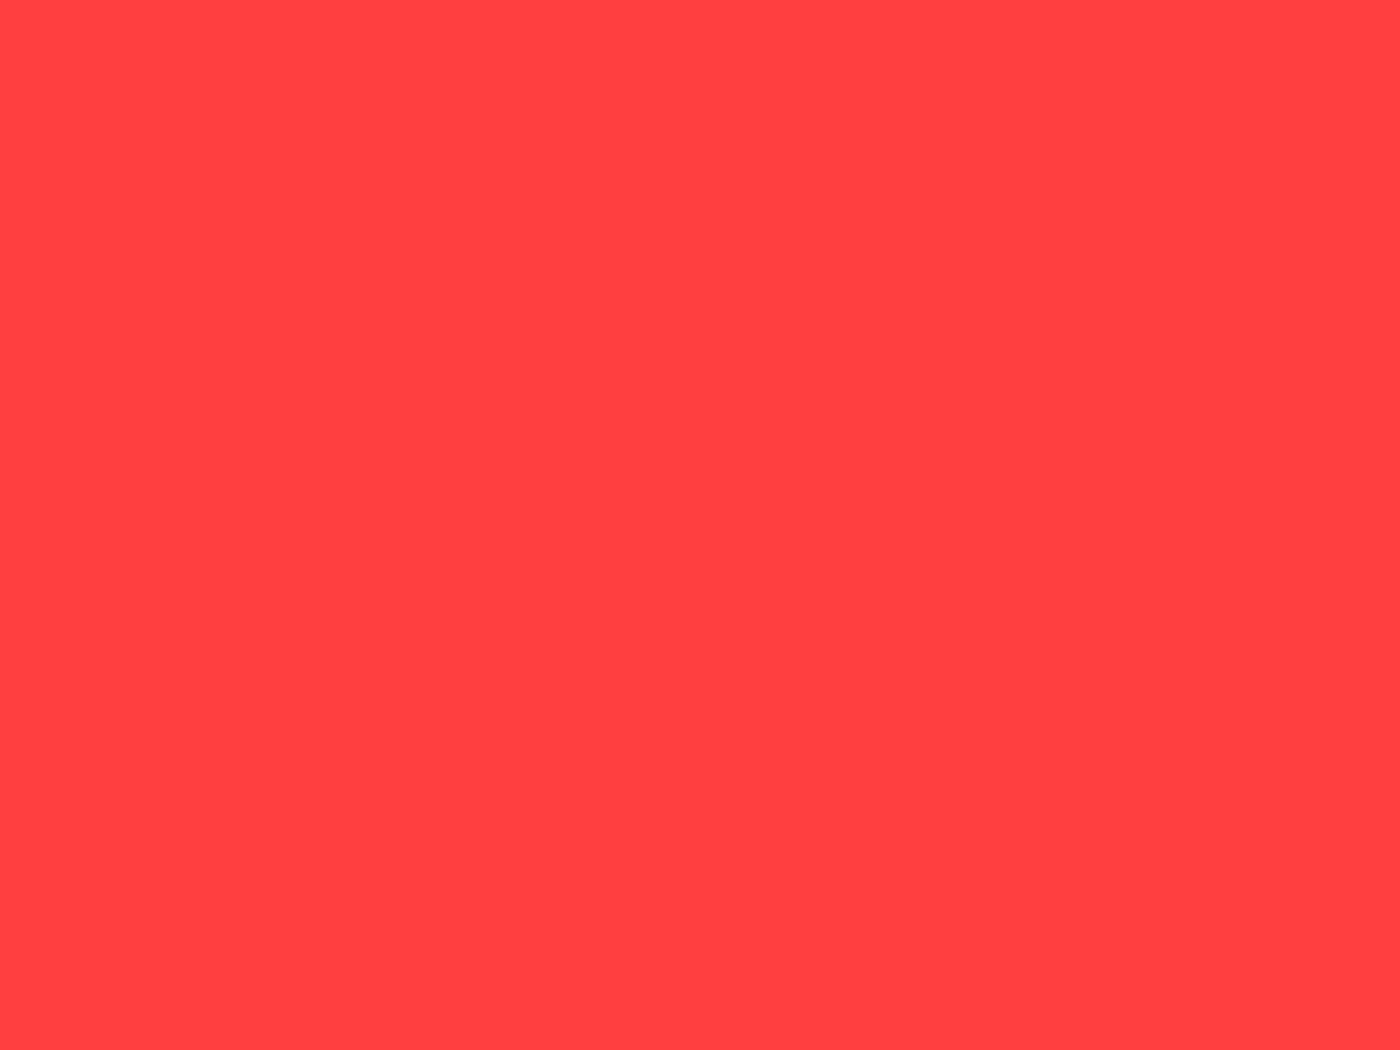 1400x1050 Coral Red Solid Color Background